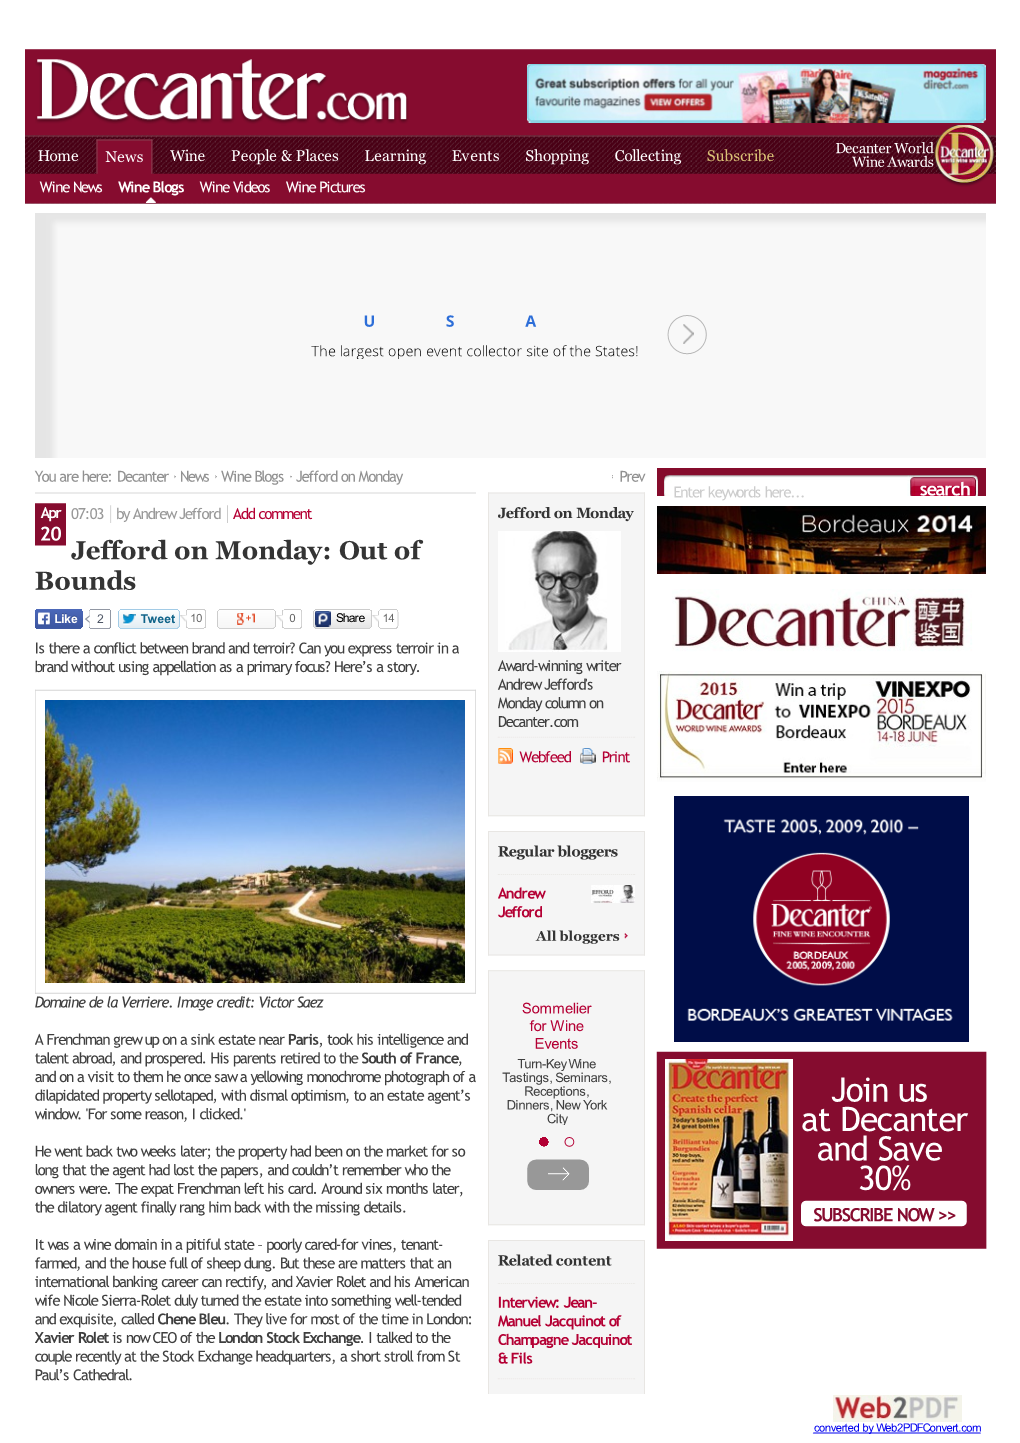 Decanter World Home News Wine People & Places Learning Events Shopping Collecting Subscribe Wine Awards Wine News Wine Blogs Wine Videos Wine Pictures